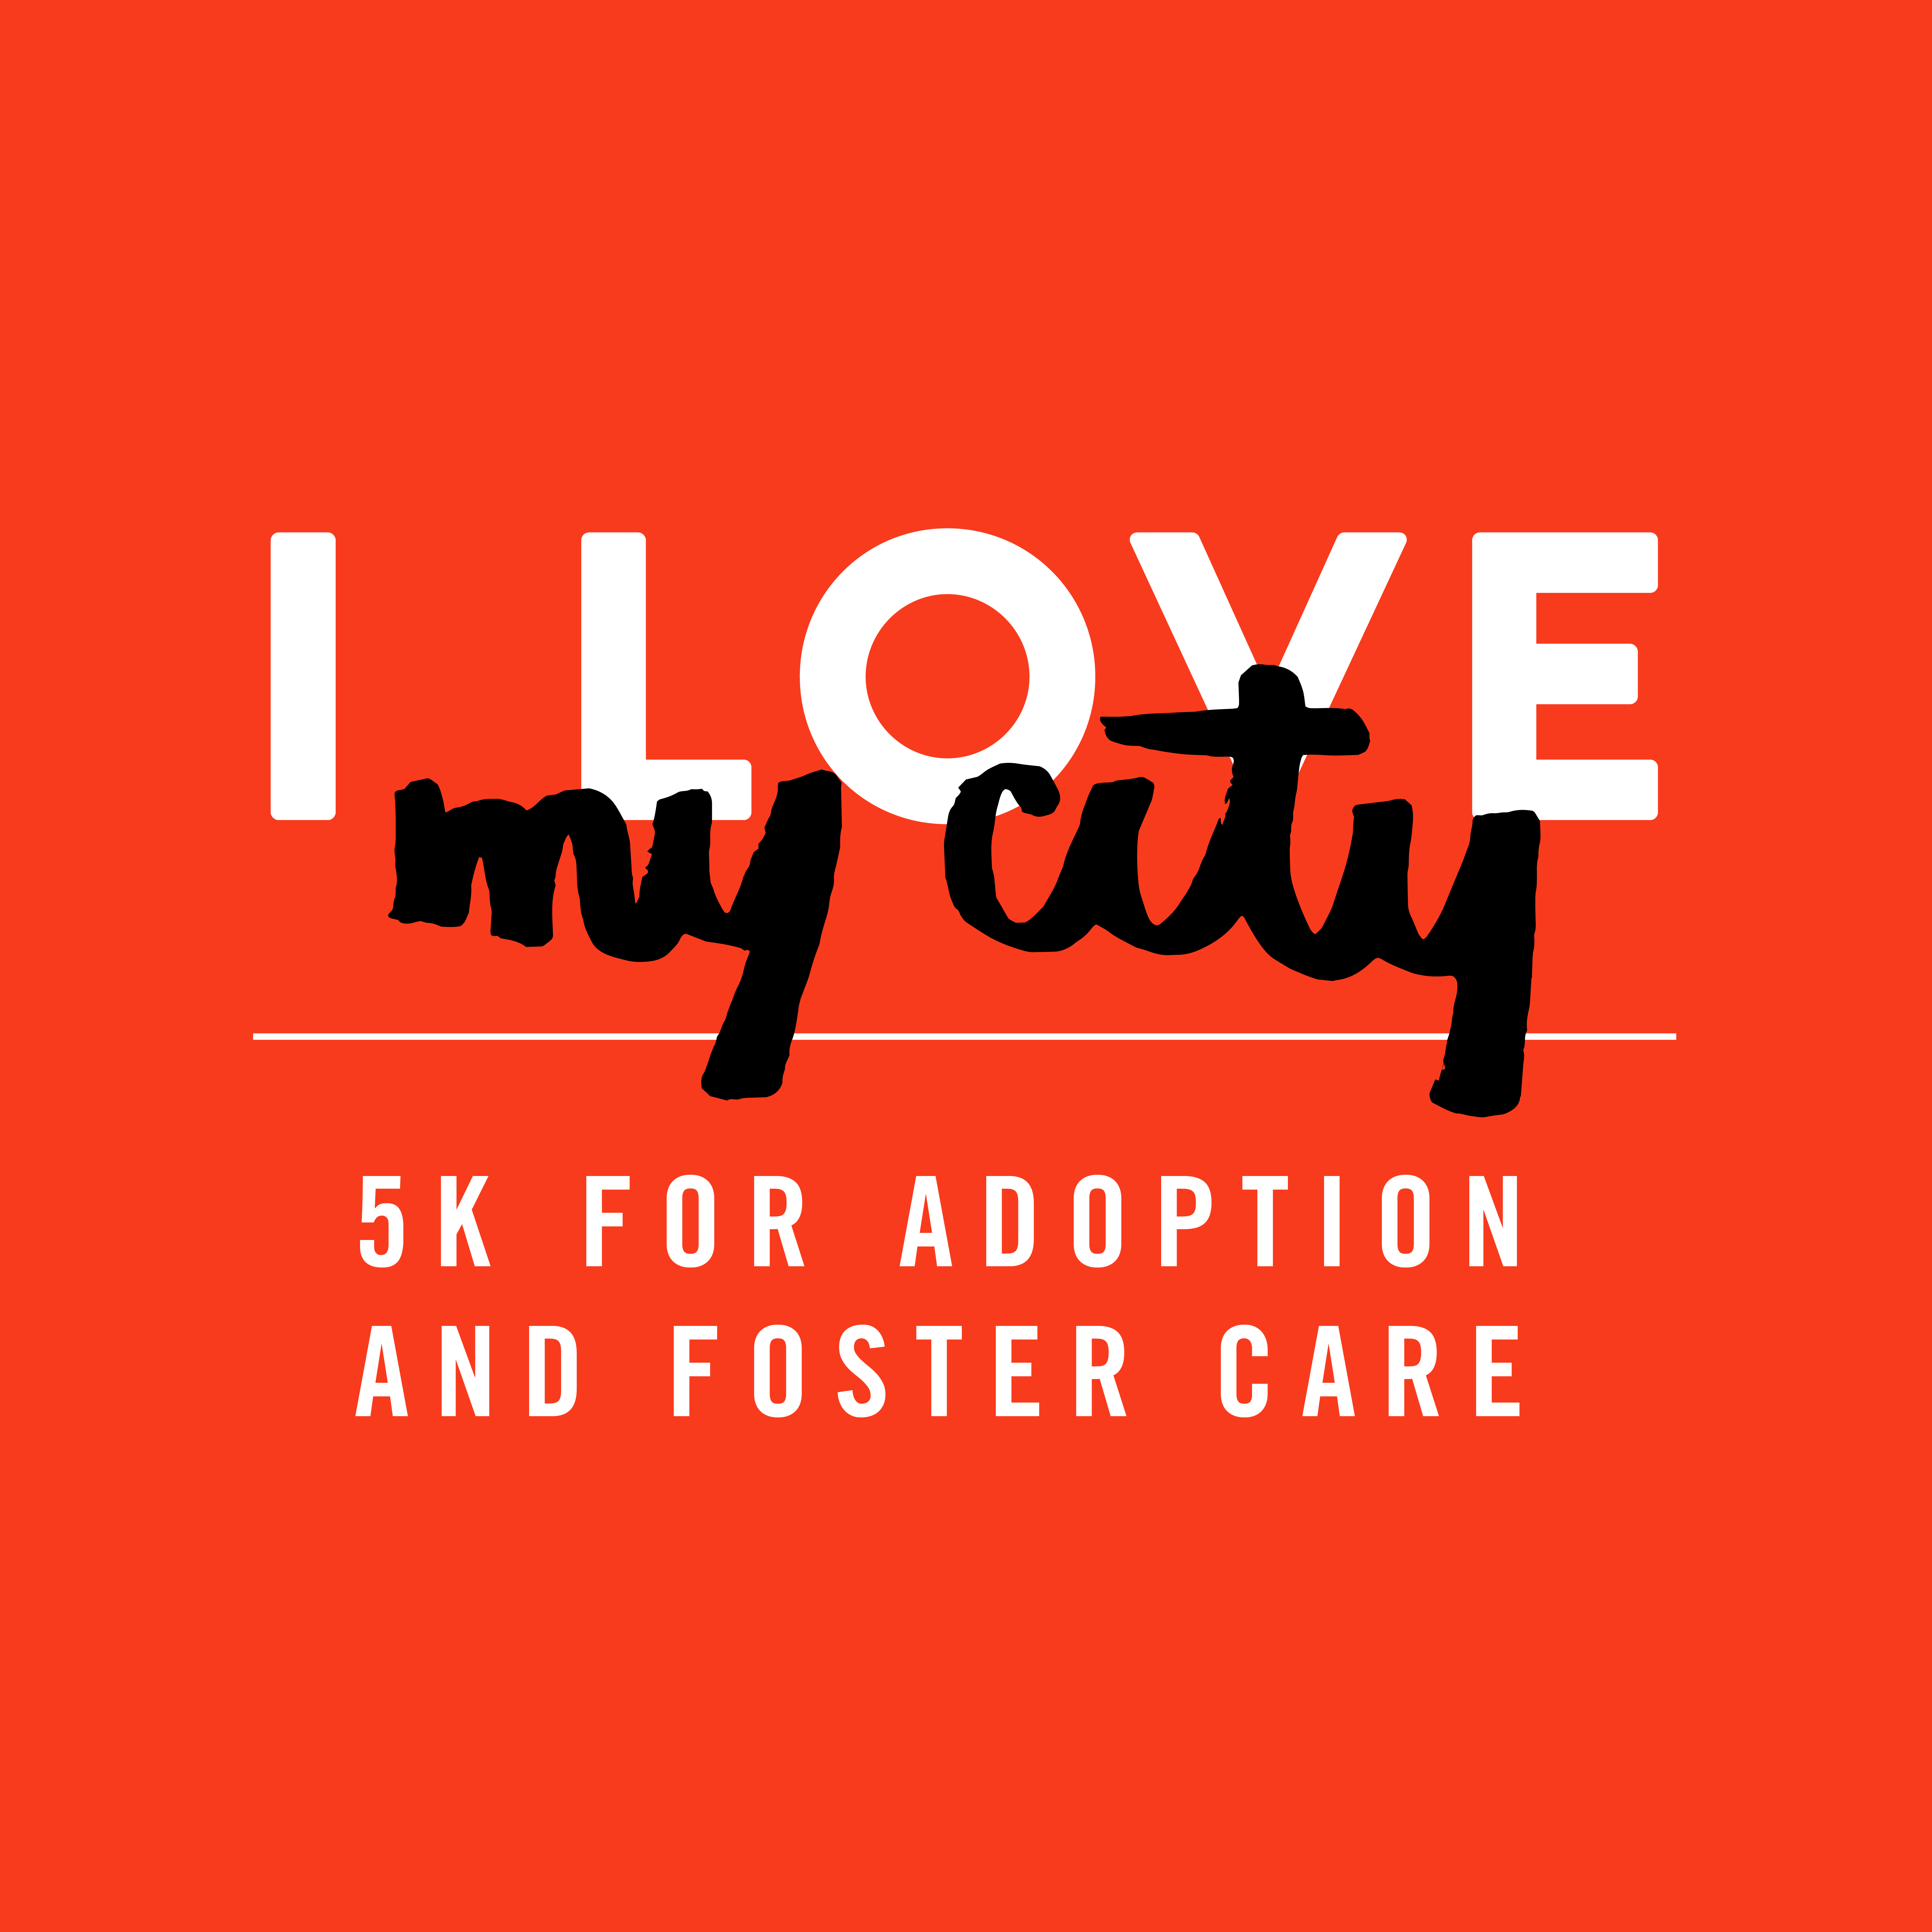 I Love My City 5k for Foster Care and Adoption – RacePenguin